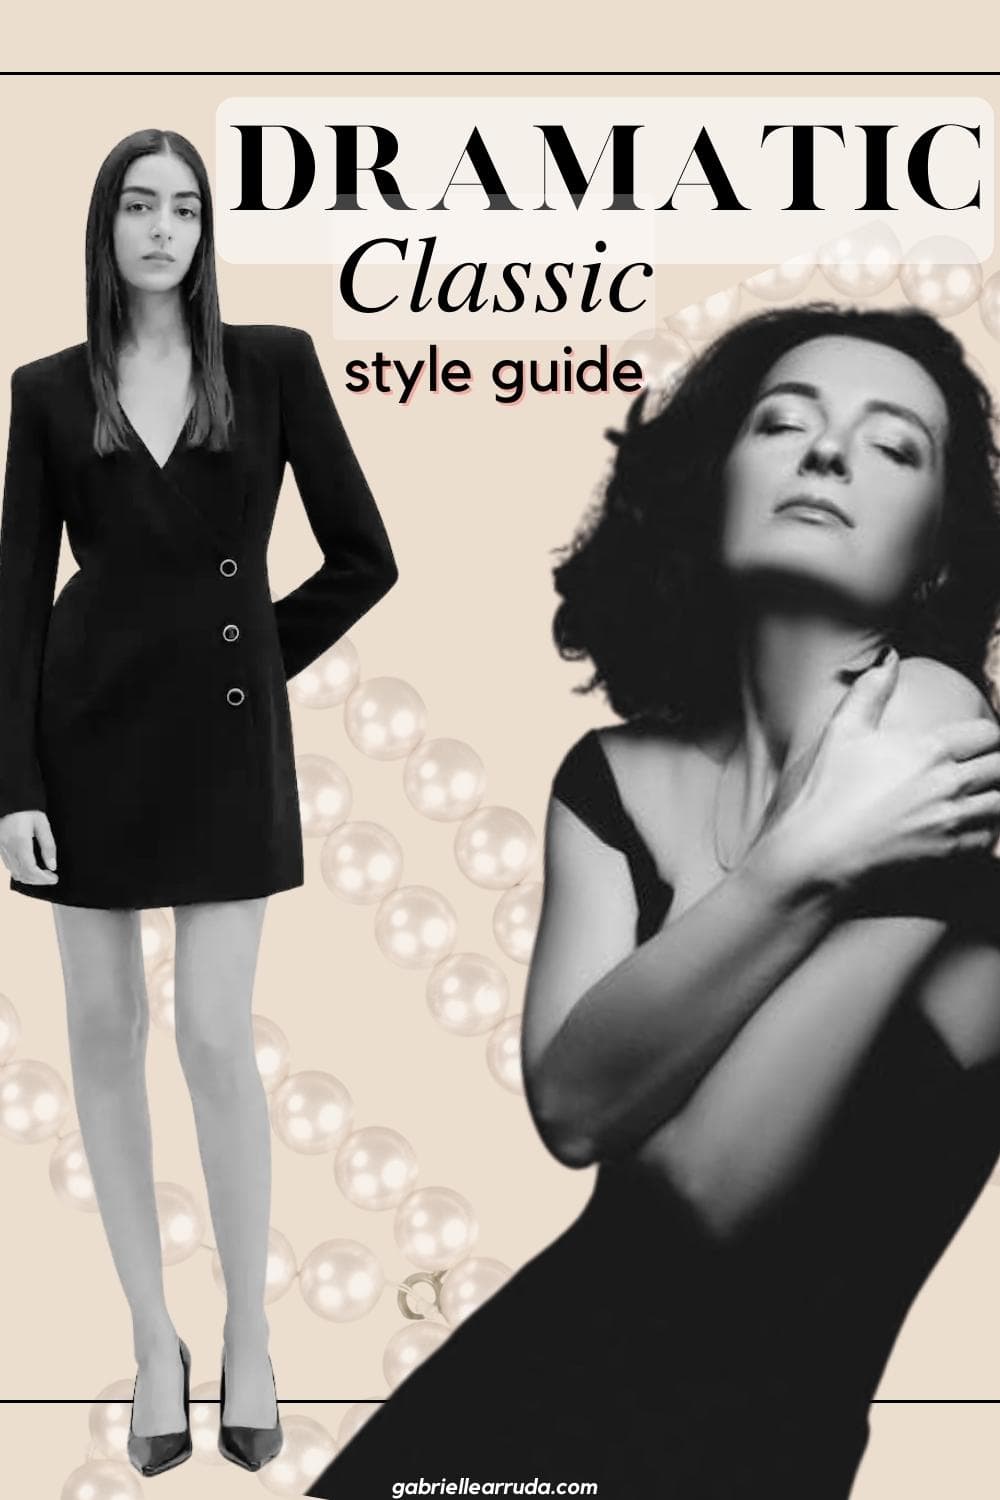 dramatic classic style guide